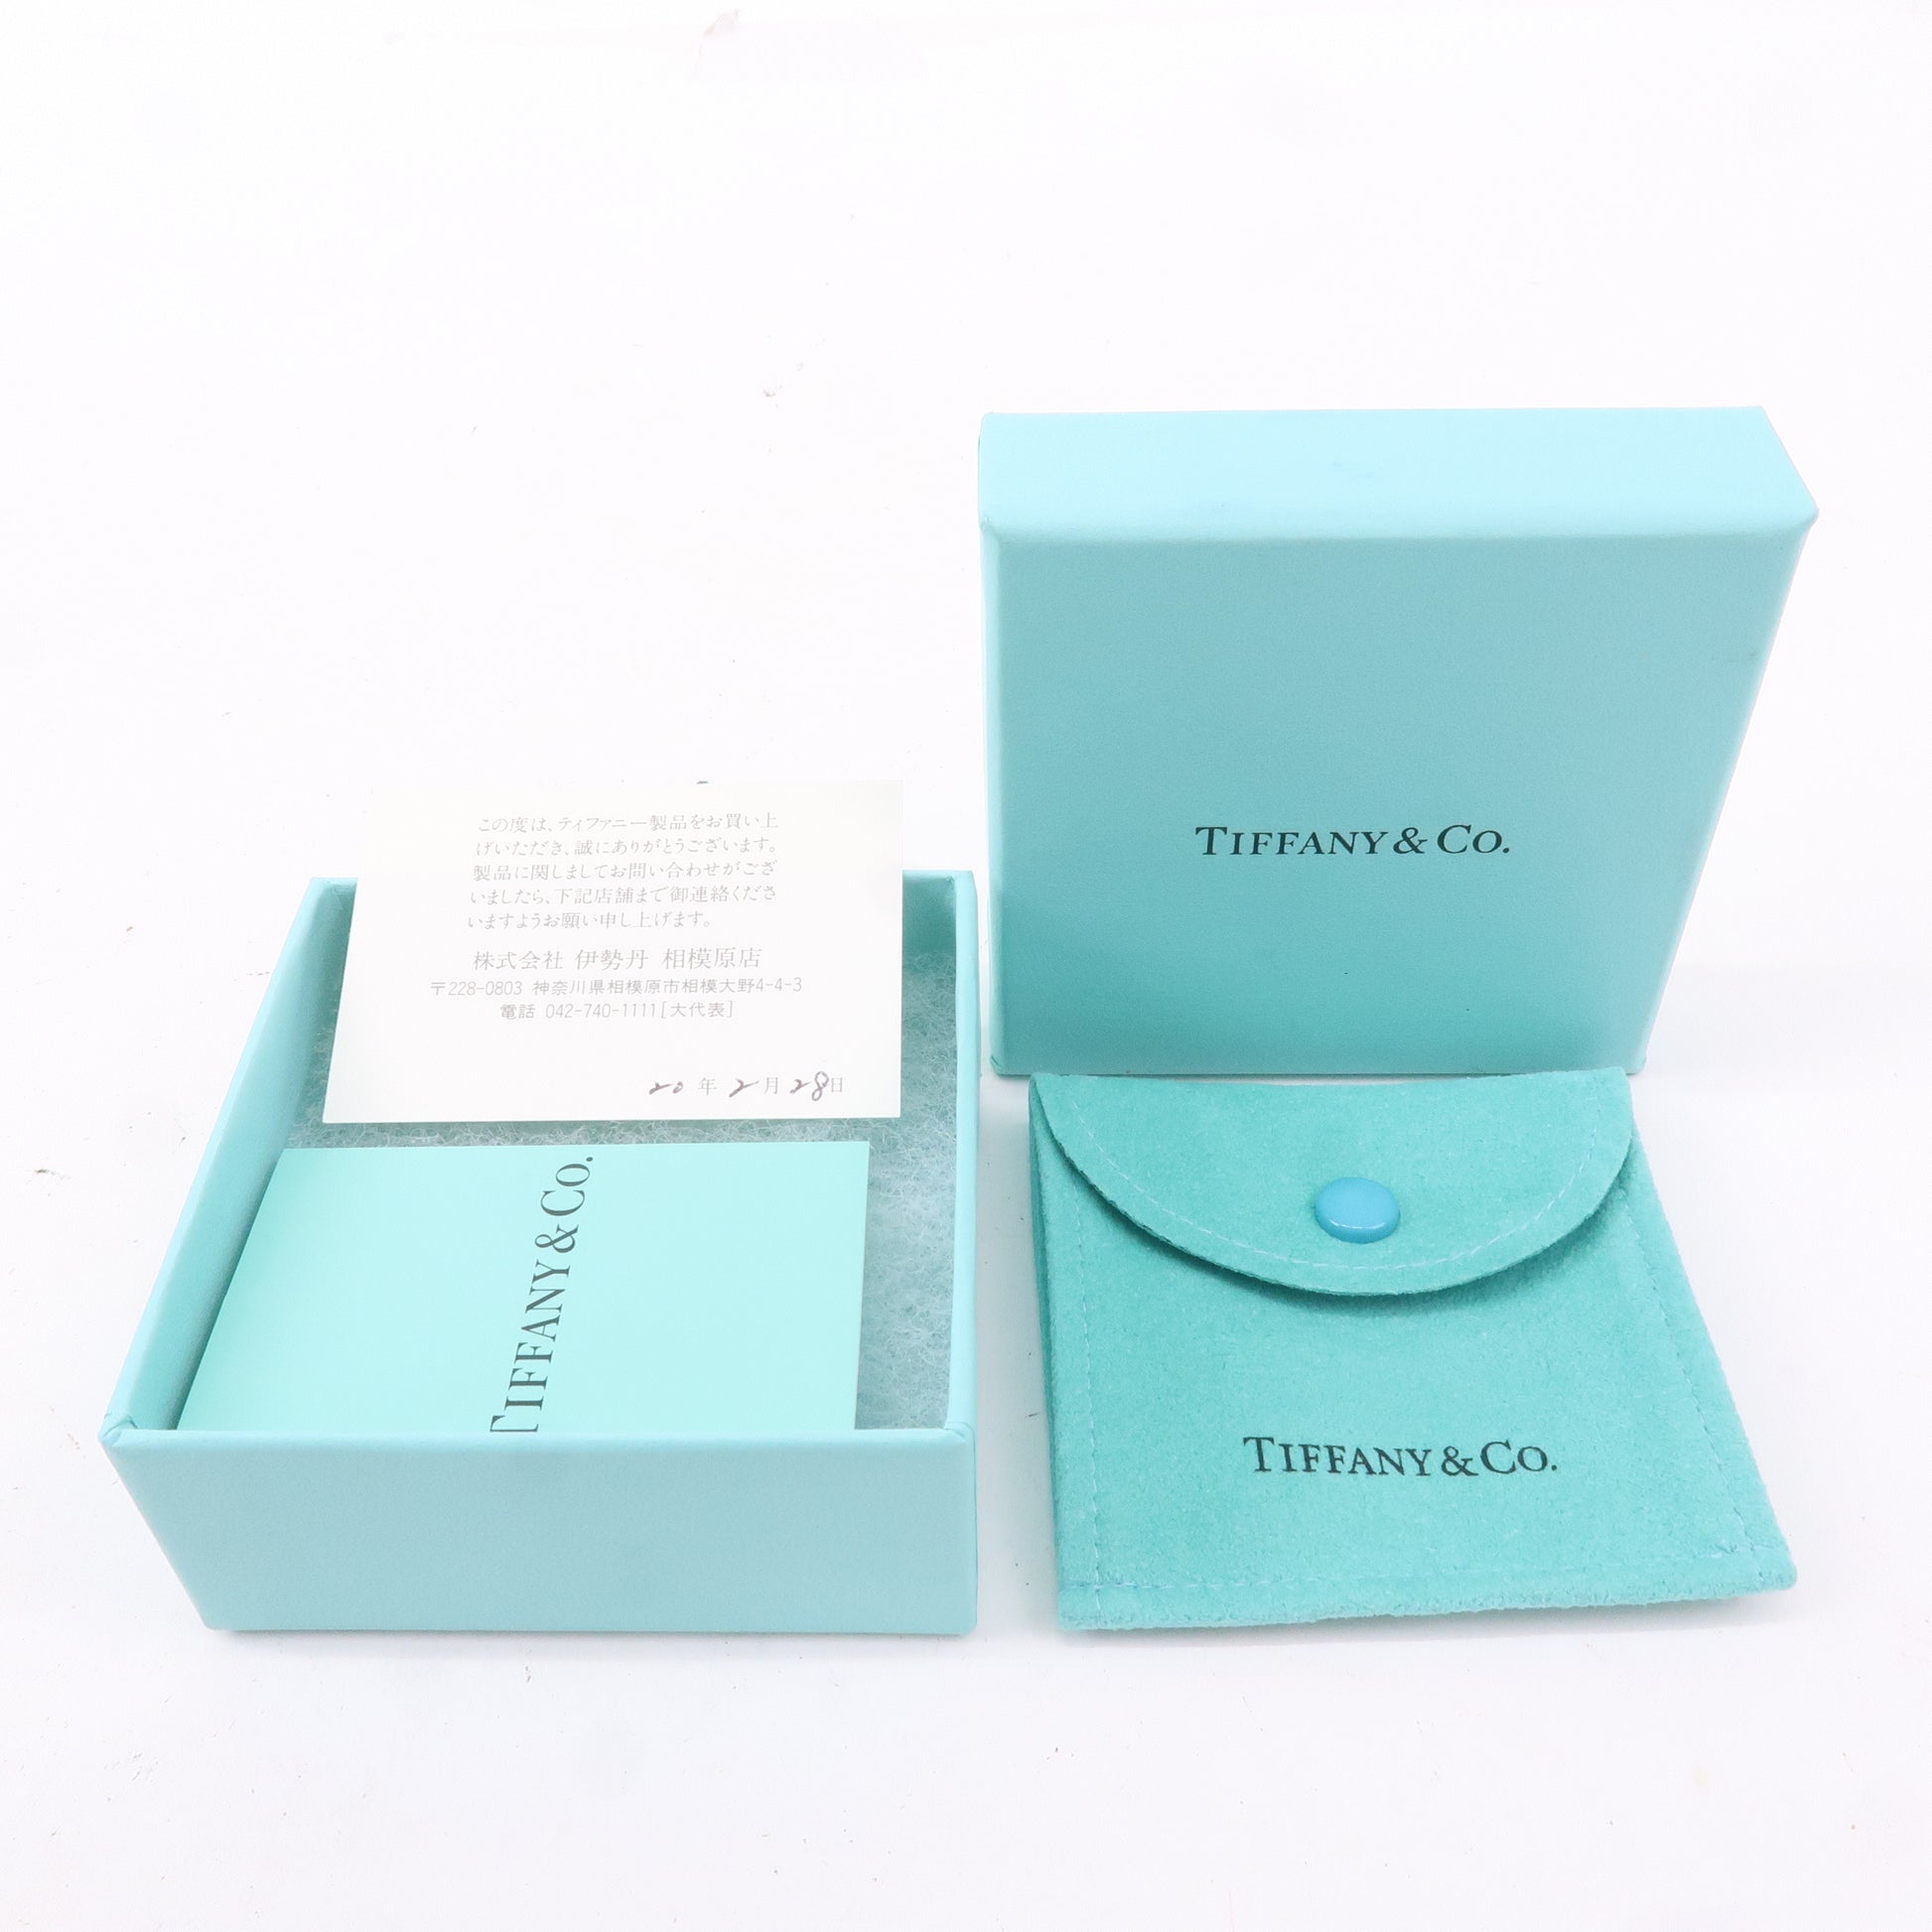 Authentic Tiffany Jewelry Pouch / Dust Bag - different sizes available